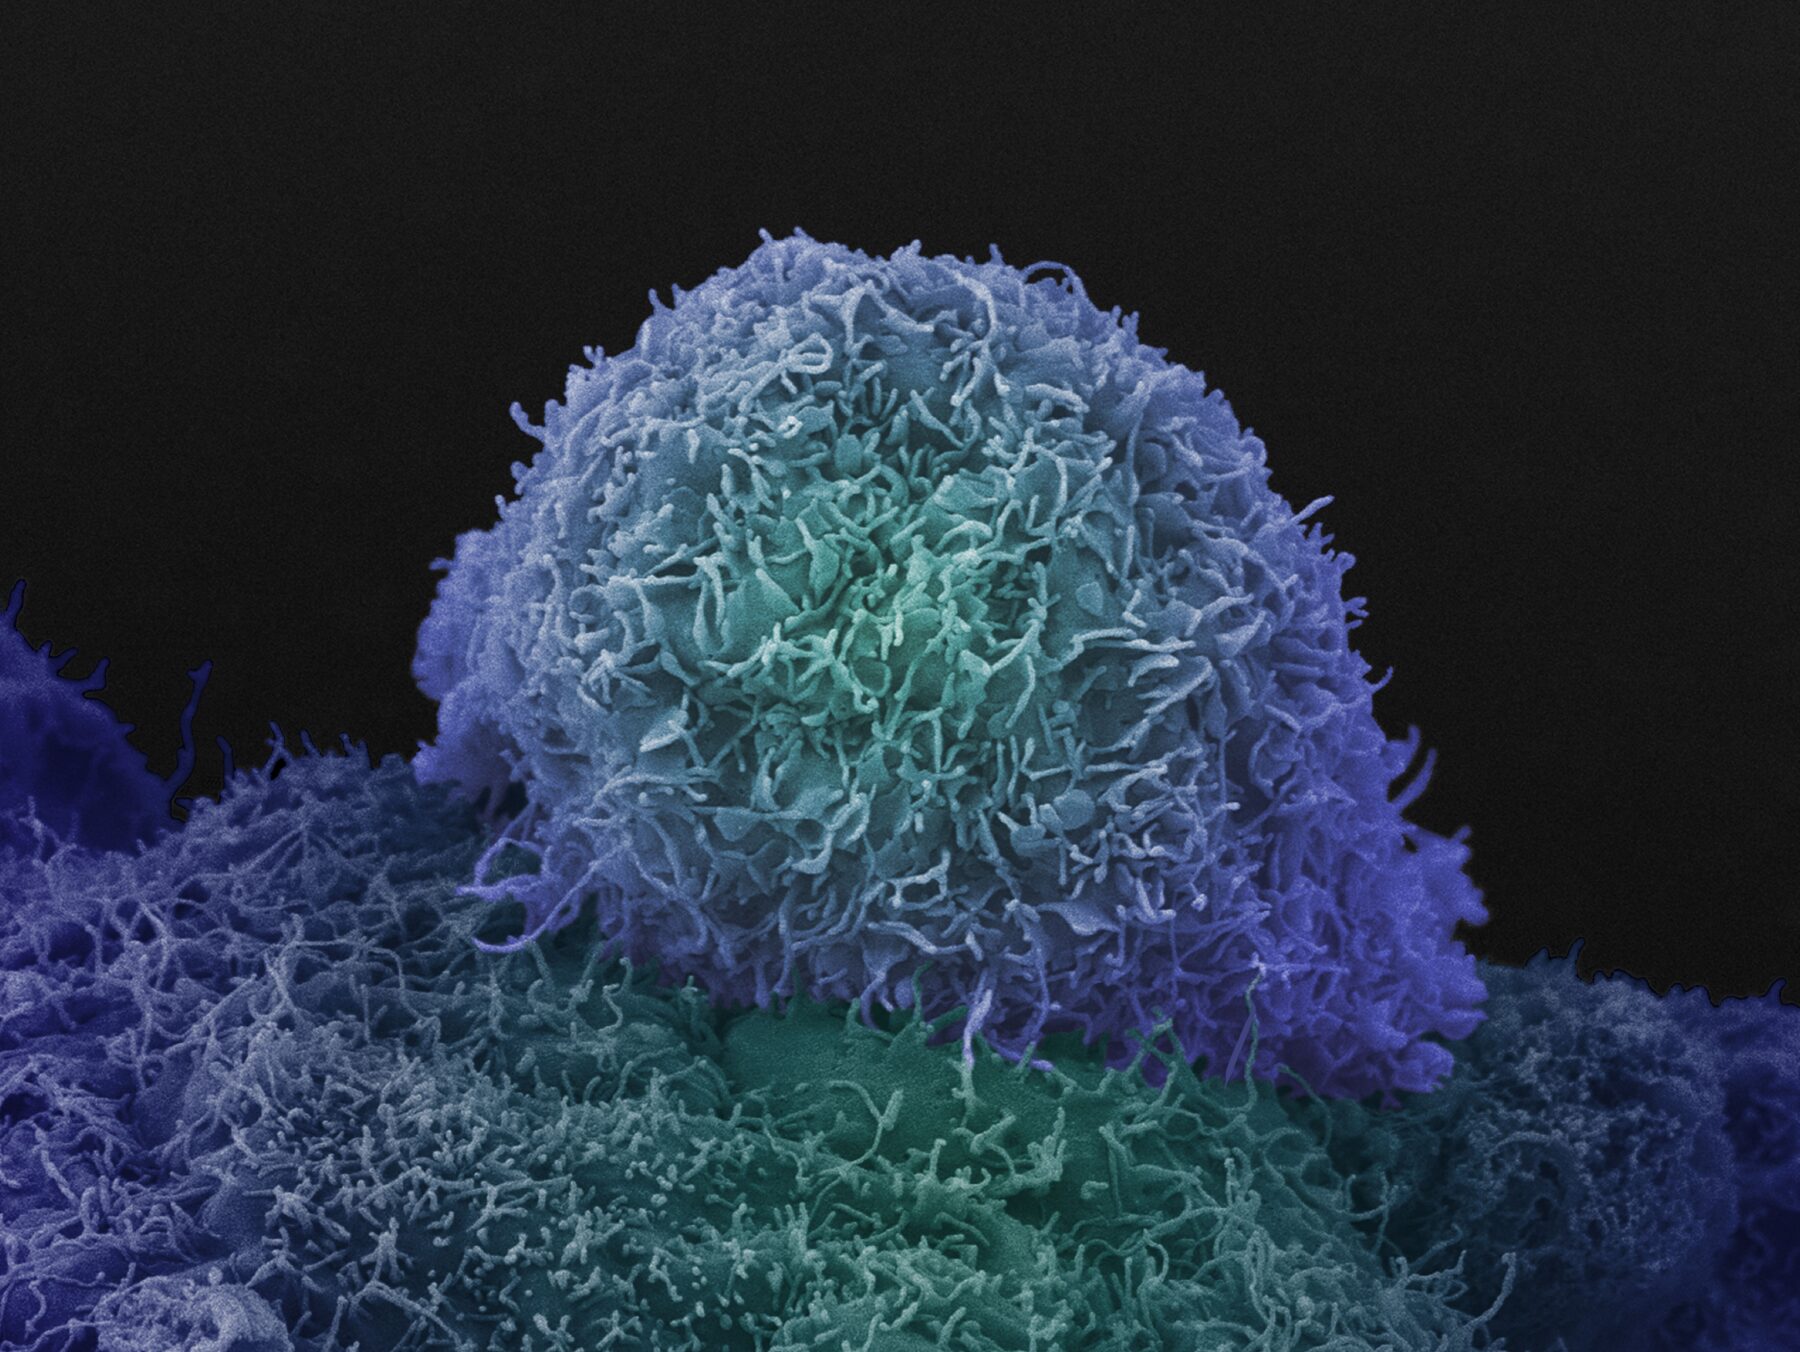 Prostate Cancer cell image taken using a Scanning Electron Microscope